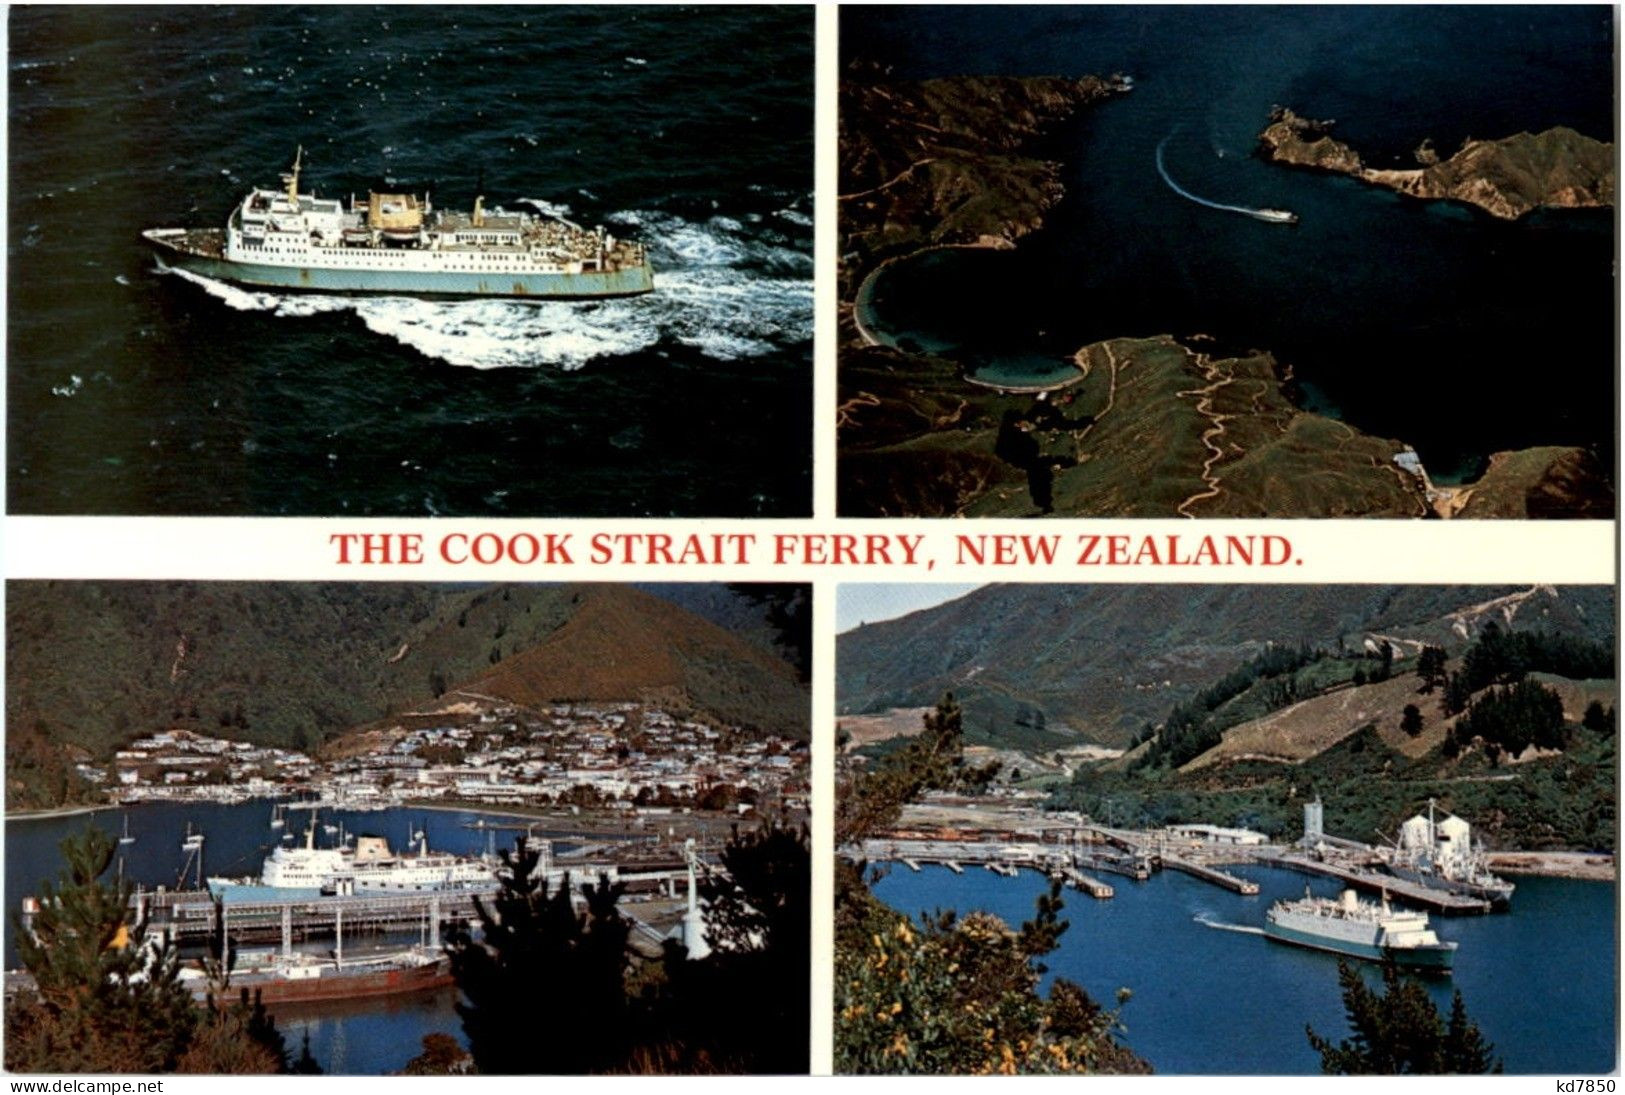 The Cook Strait Ferry - New Zealand